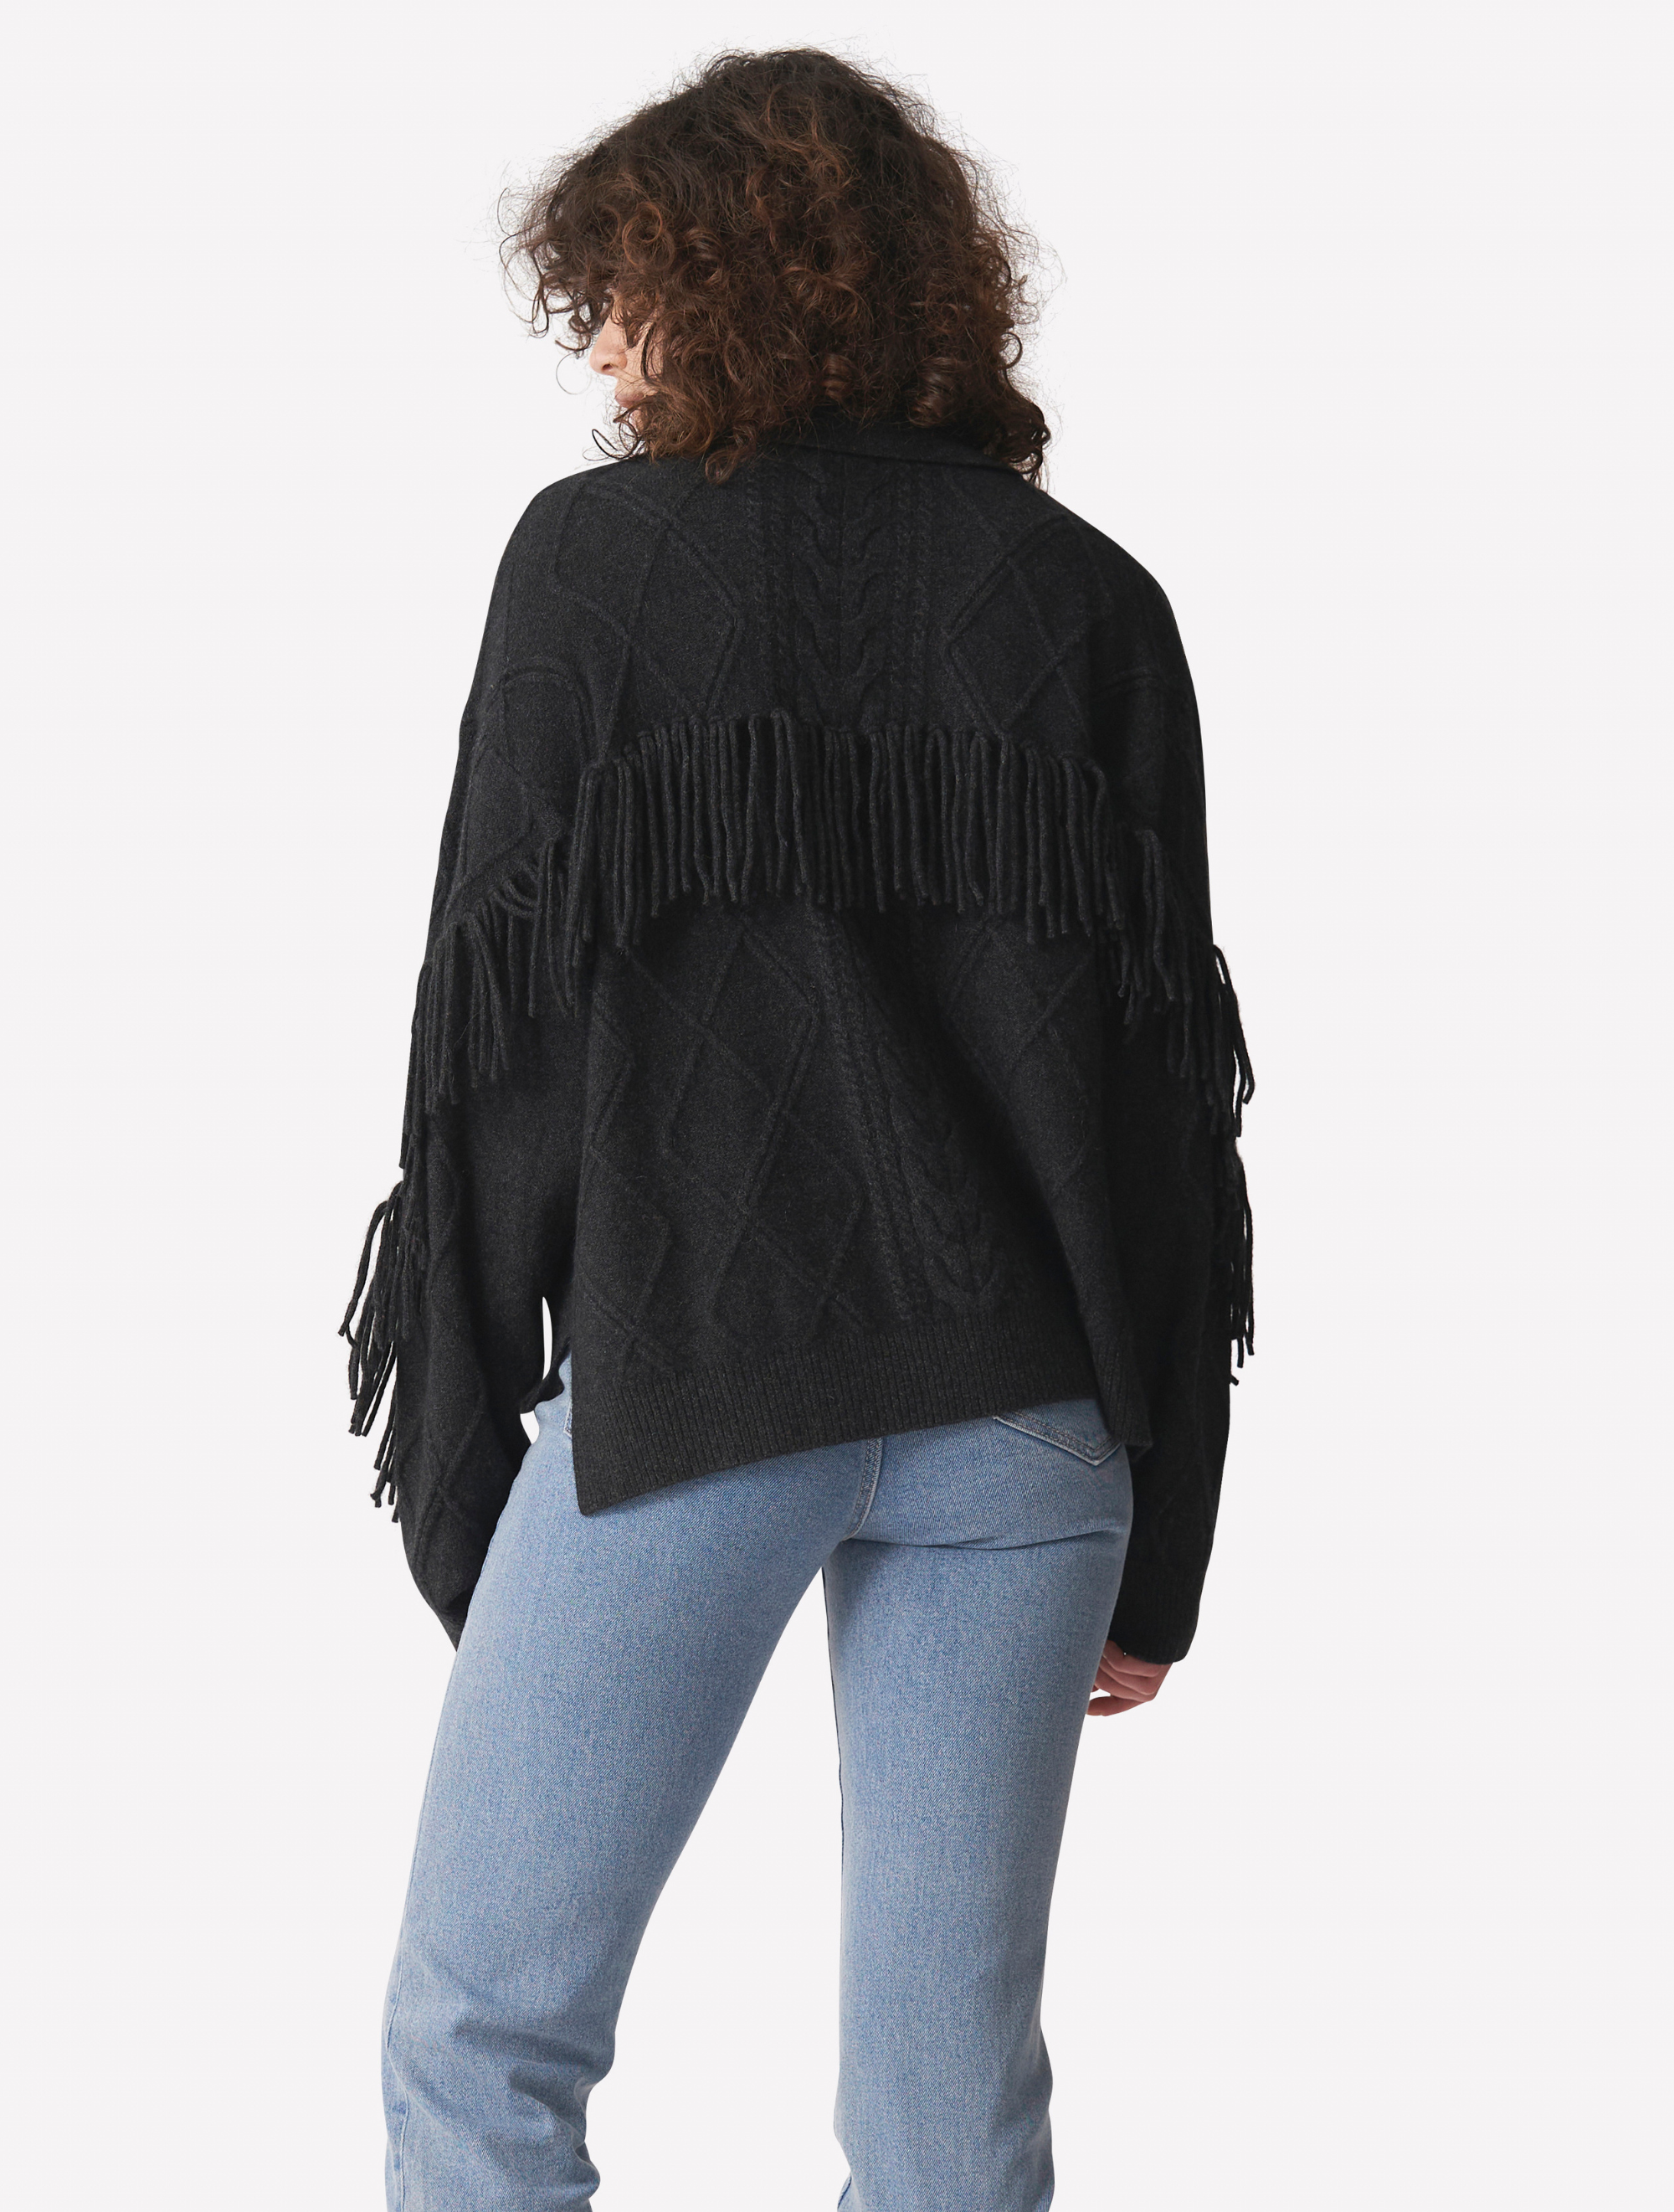 Charcoal grey cashmere polo neck jumper with dropped shoulders cable knit and fringing details across arms and back